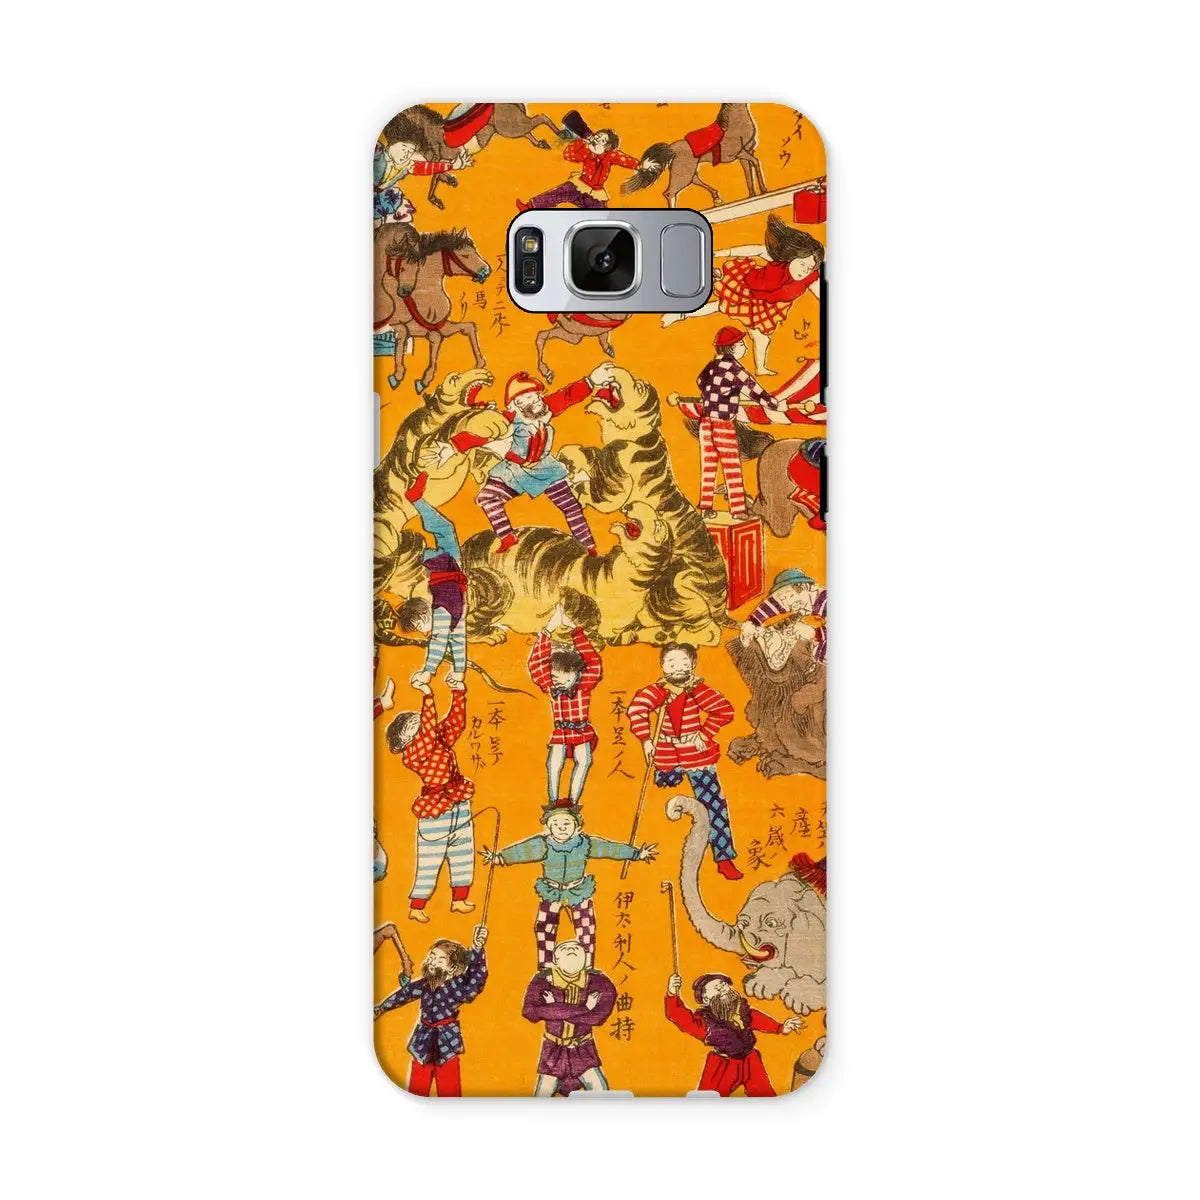 Japanese Circus Woodcut - Edo Period Poster Art Phone Case - Samsung Galaxy S8 / Matte - Mobile Phone Cases - Aesthetic